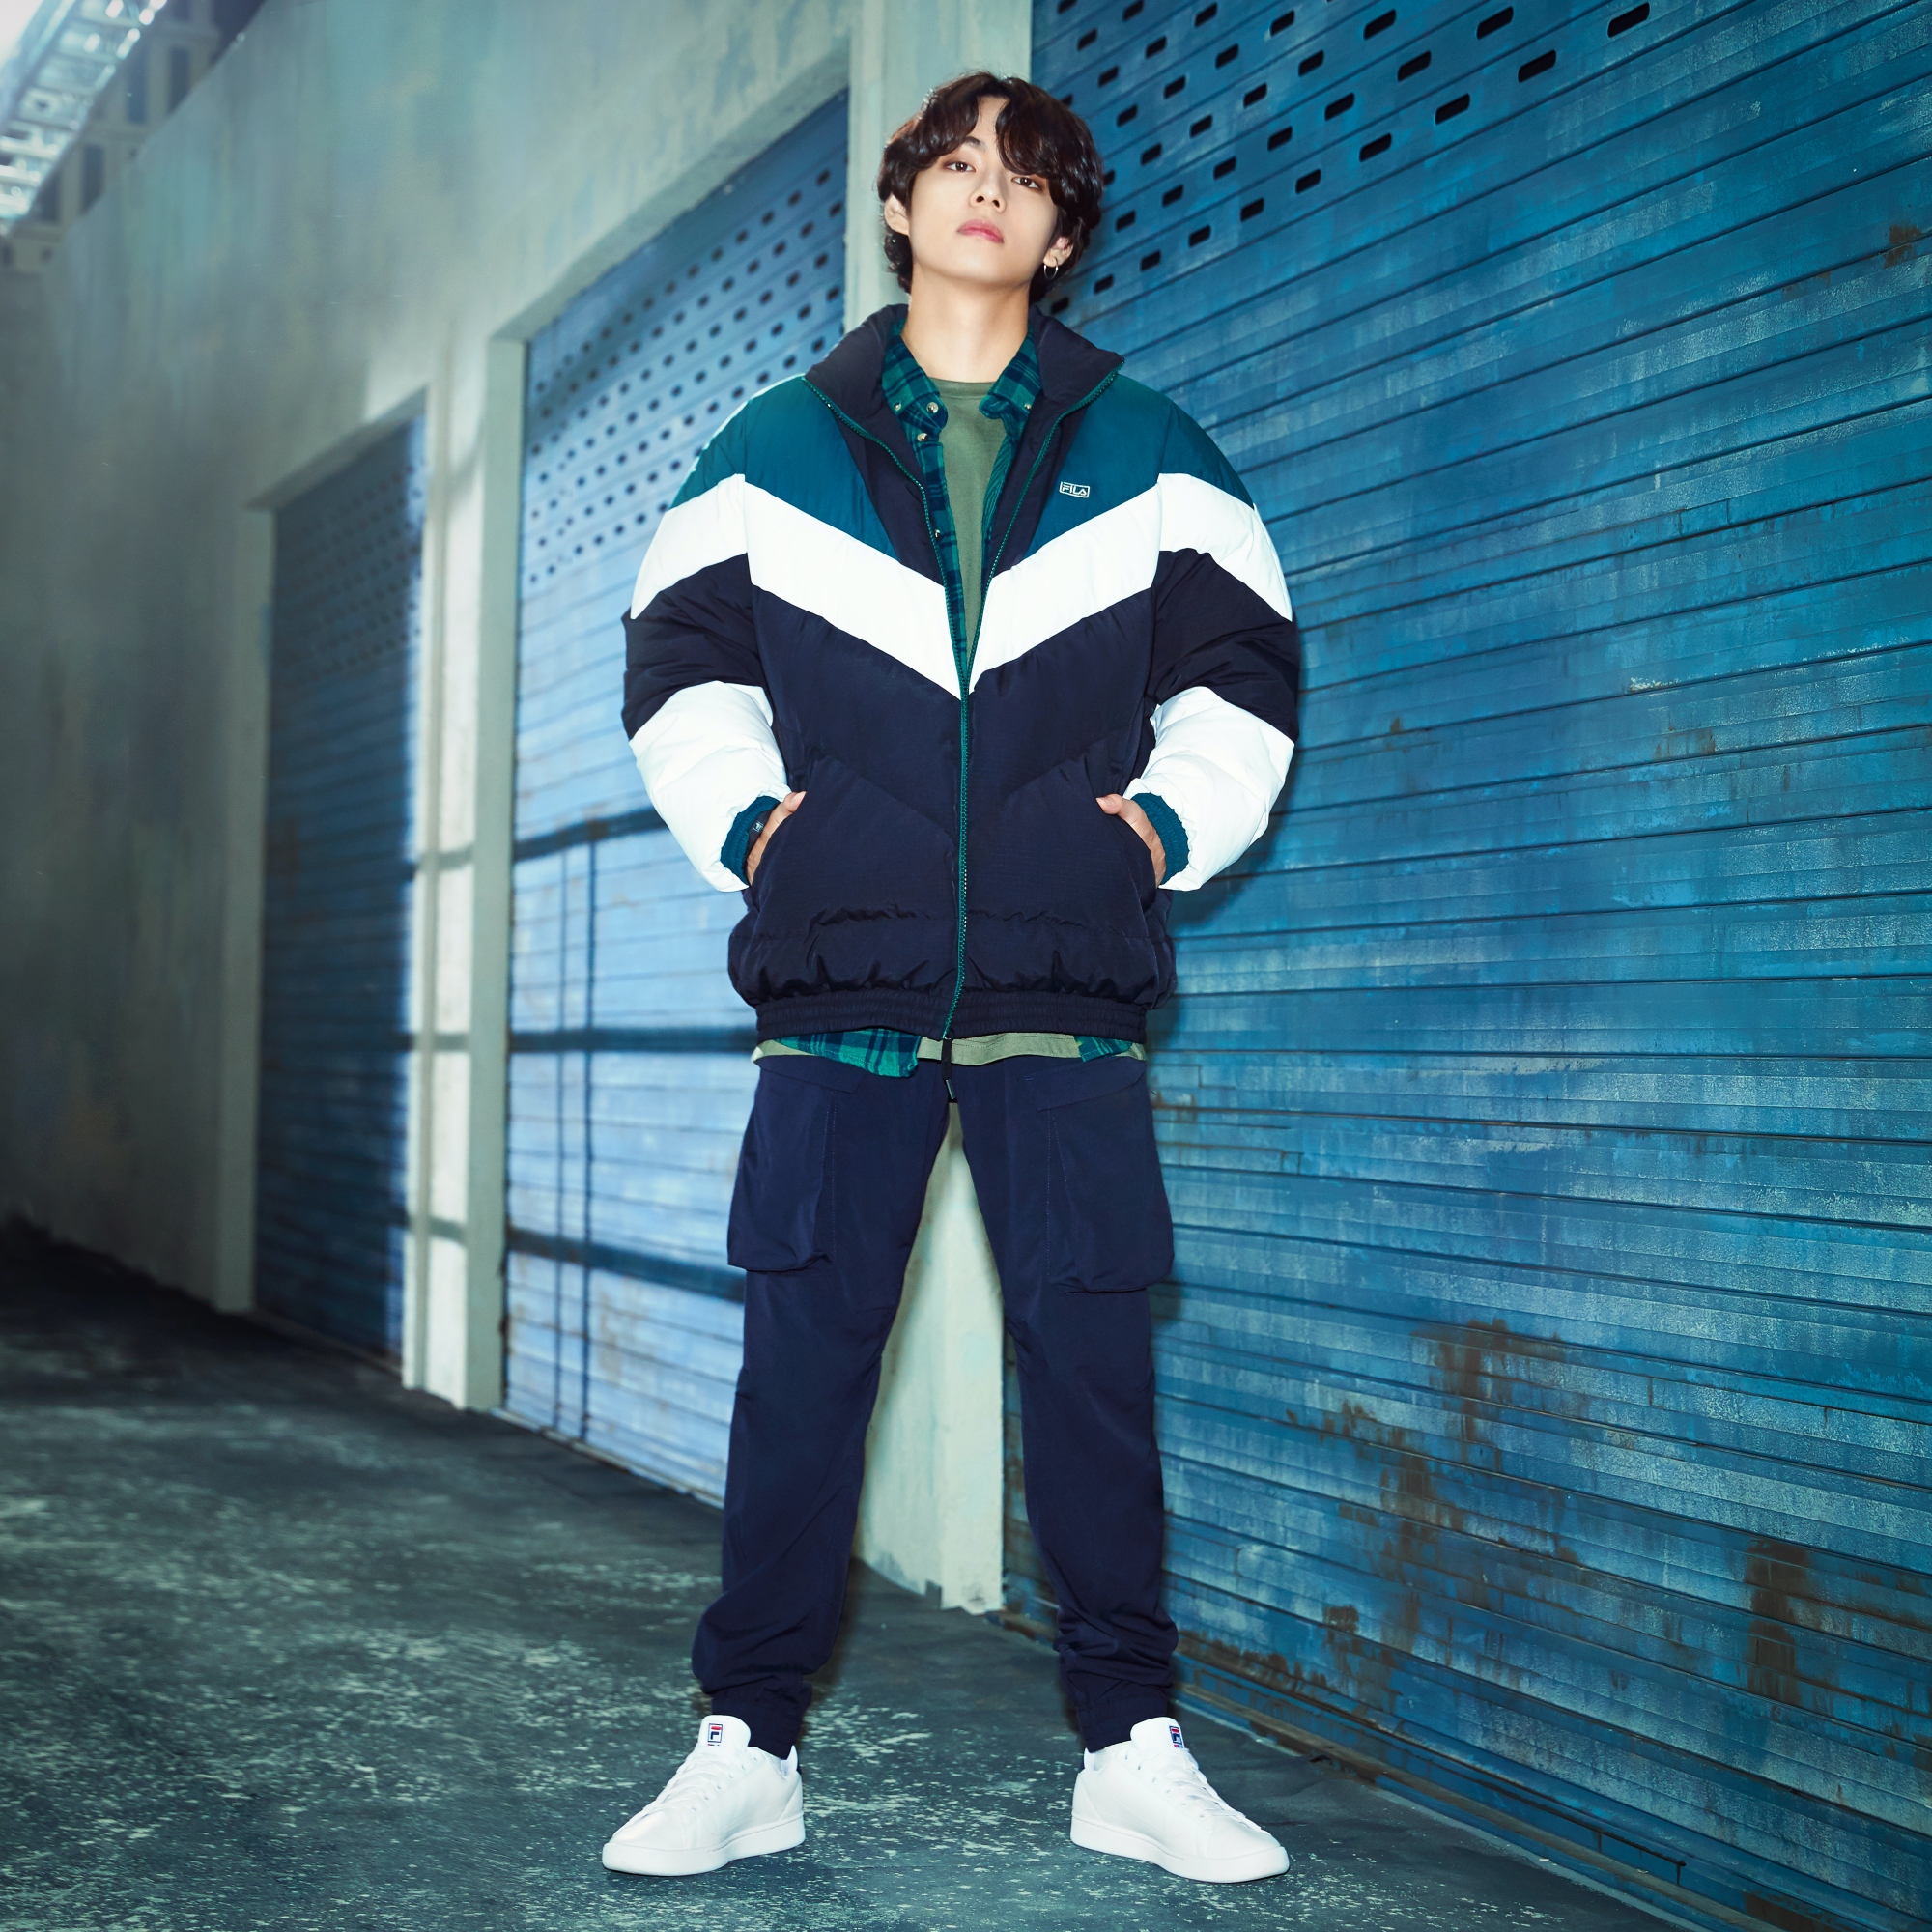 [Picture/Video] FILA ON THE STREET | 2020 FILA Winter Collection